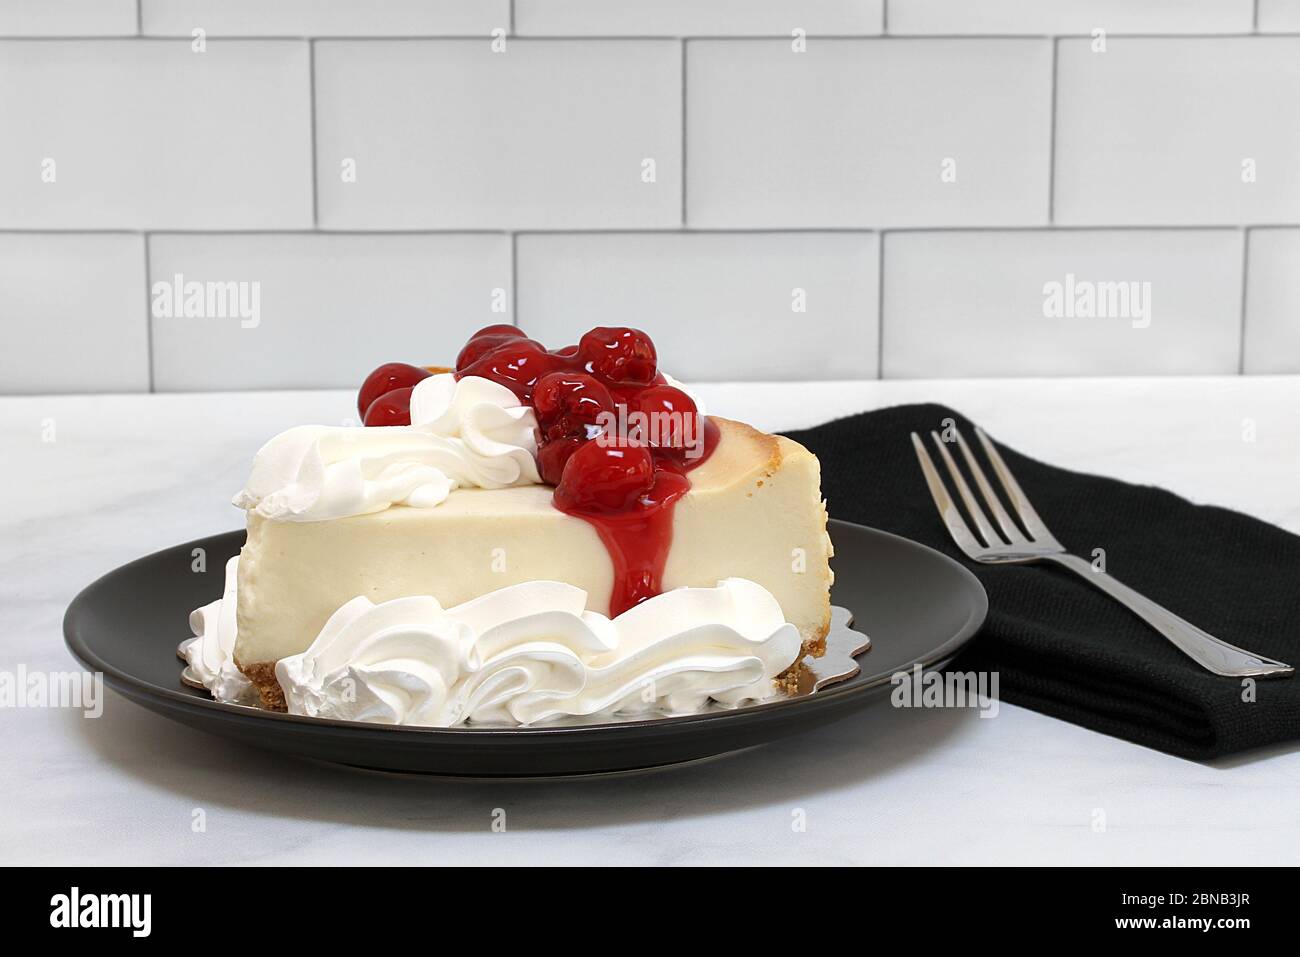 One slice of delicious New York cheesecake garnished with cherries and whipped cream. Stock Photo